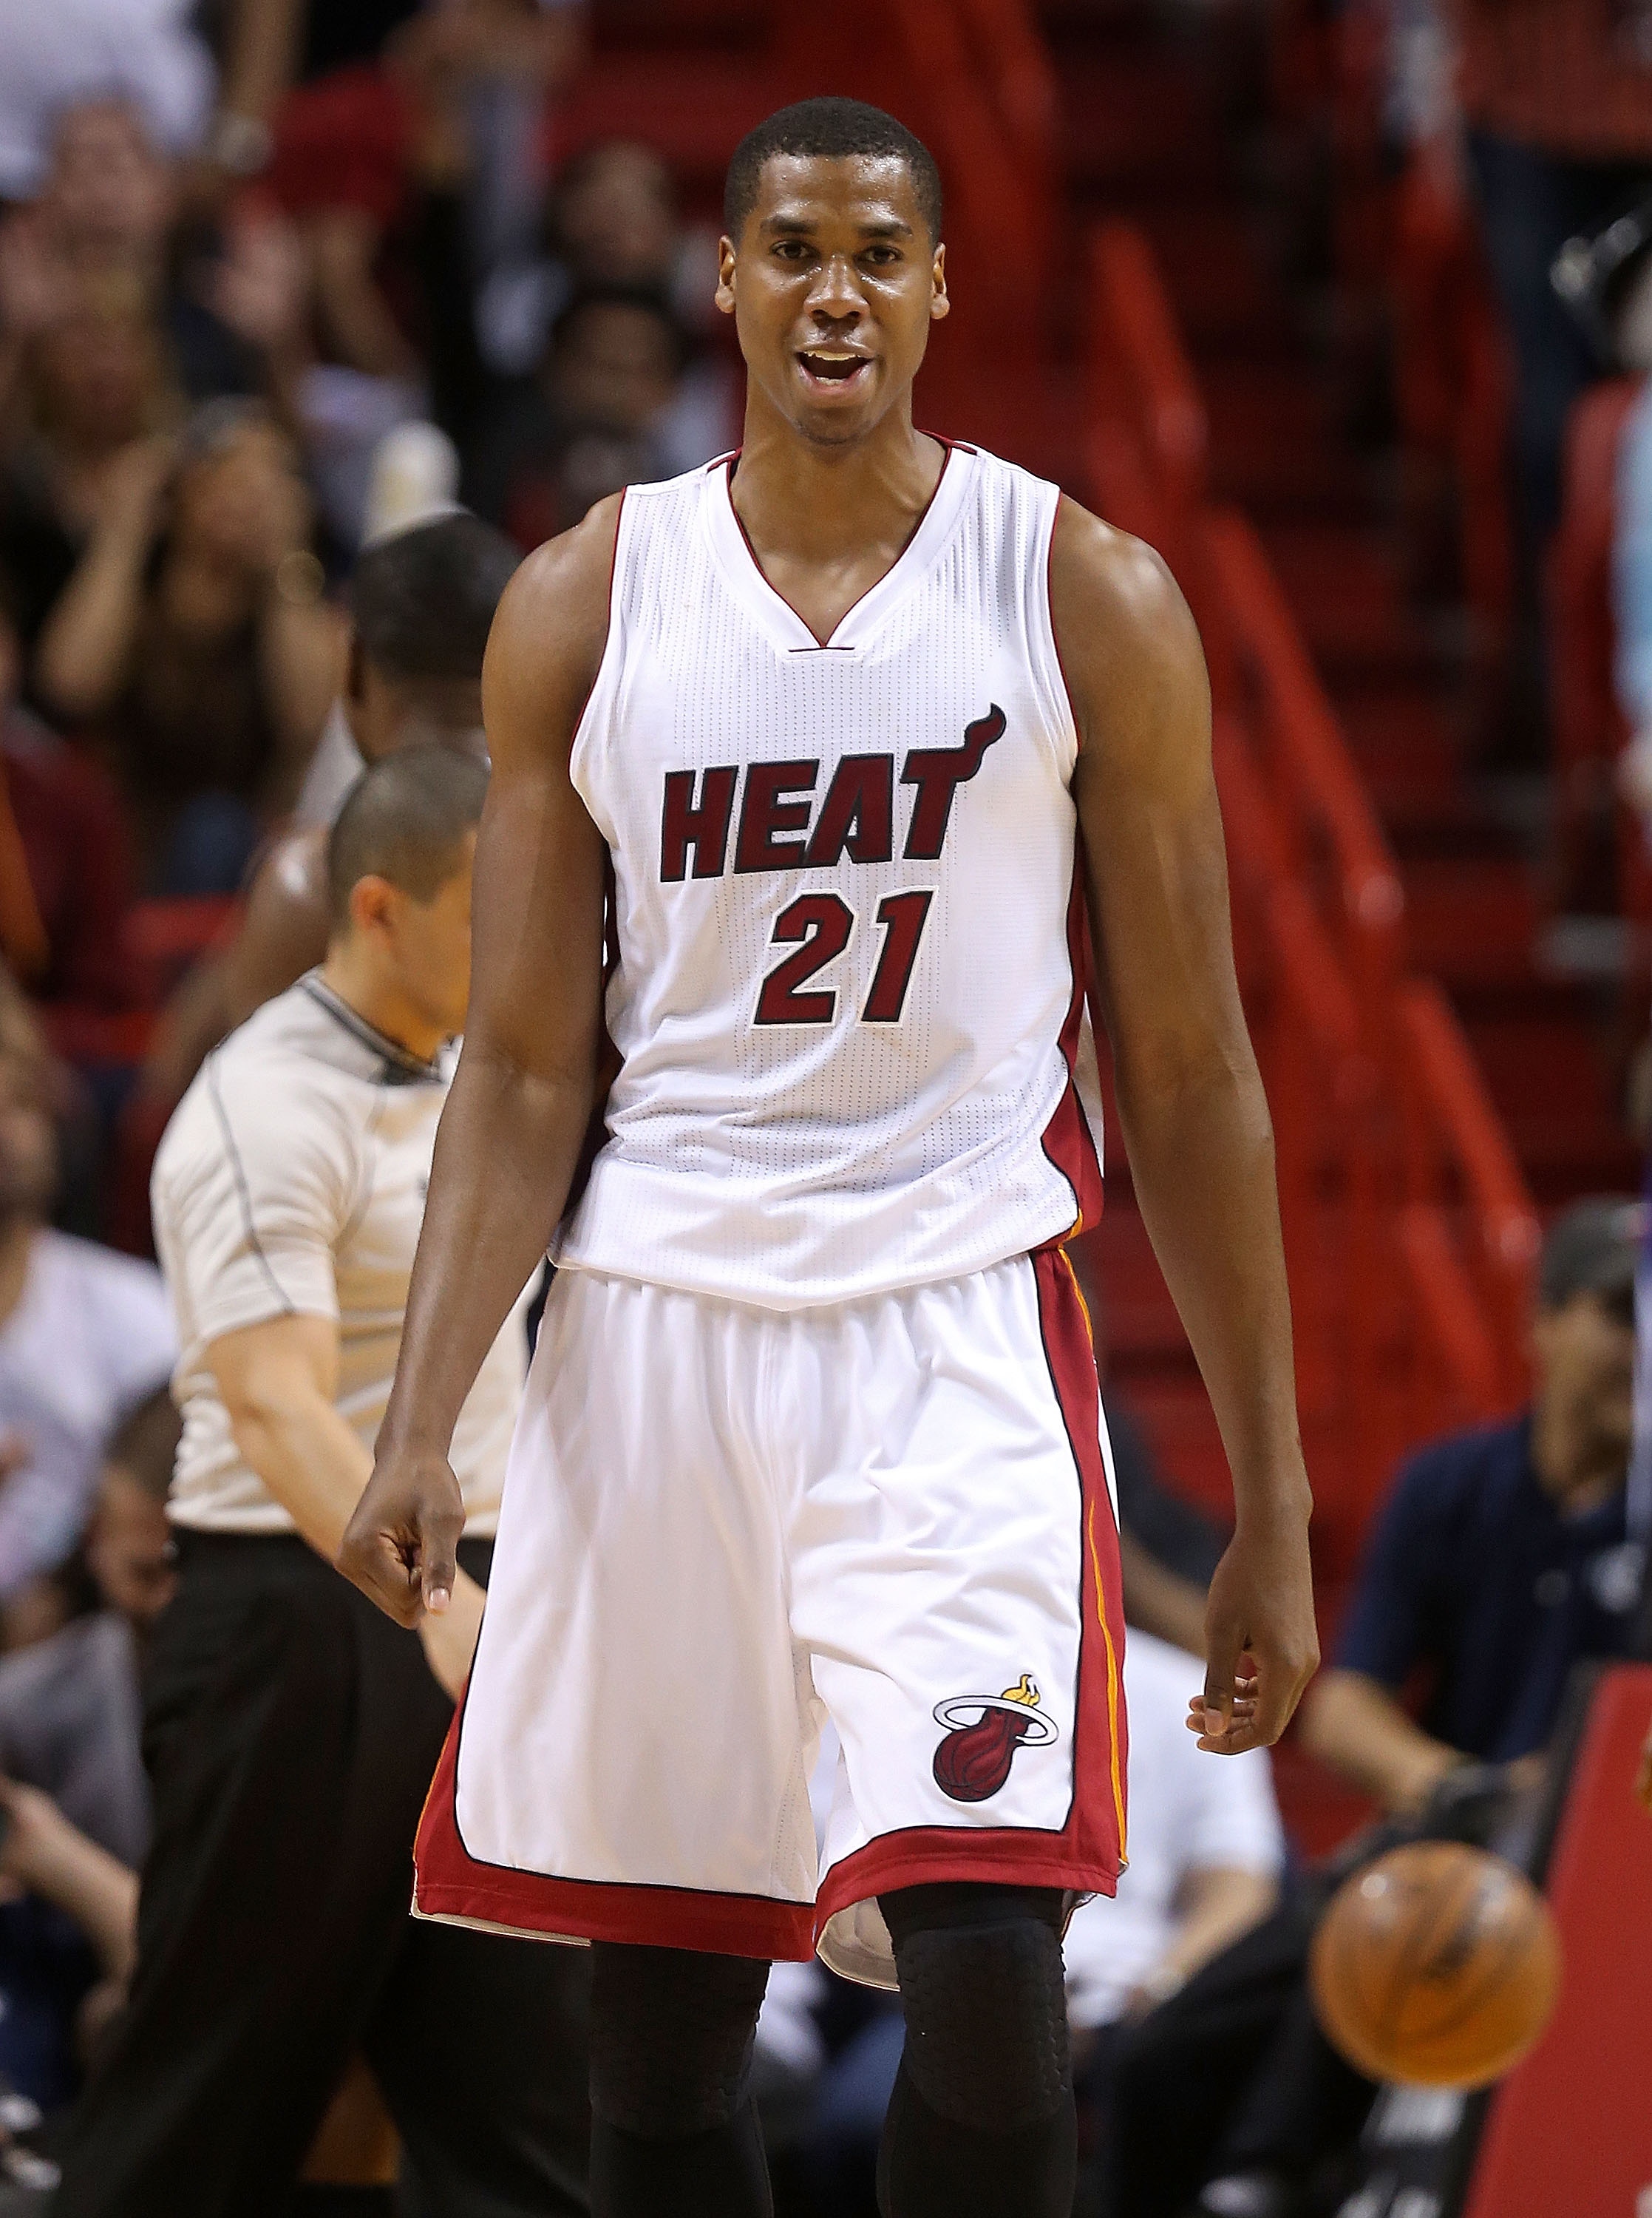 MIAMI, FL - FEBRUARY 28:  Hassan Whiteside #21 of the Miami Heat reacts to  a play during a game against the Atlanta Hawks at American Airlines Arena on February 28, 2015 in Miami, Florida. NOTE TO USER: User expressly acknowledges and agrees that, by downloading and/or using this photograph, user is consenting to the terms and conditions of the Getty Images License Agreement. Mandatory copyright notice:  (Photo by Mike Ehrmann/Getty Images)